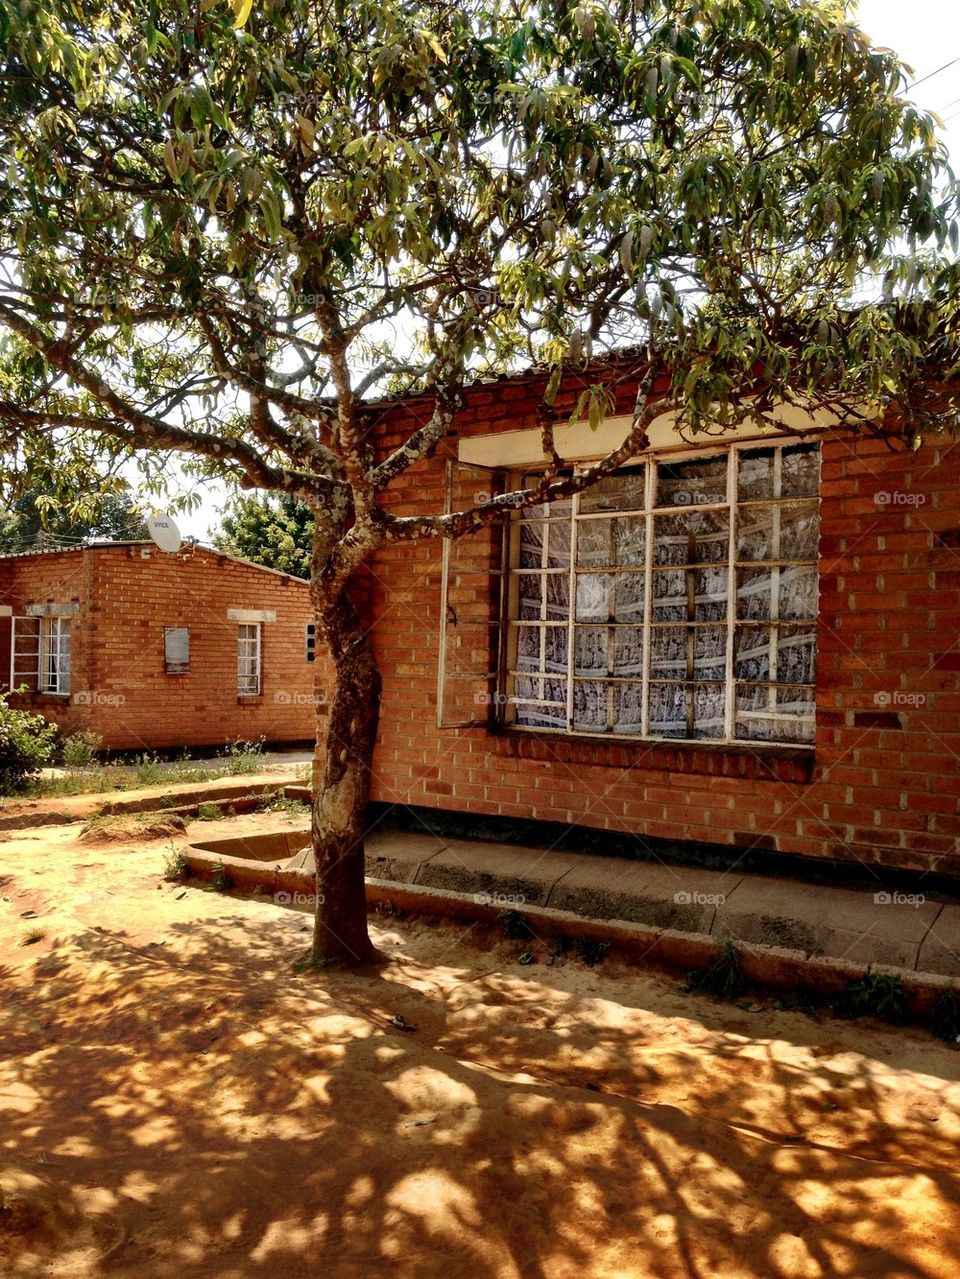 The house in Malawi